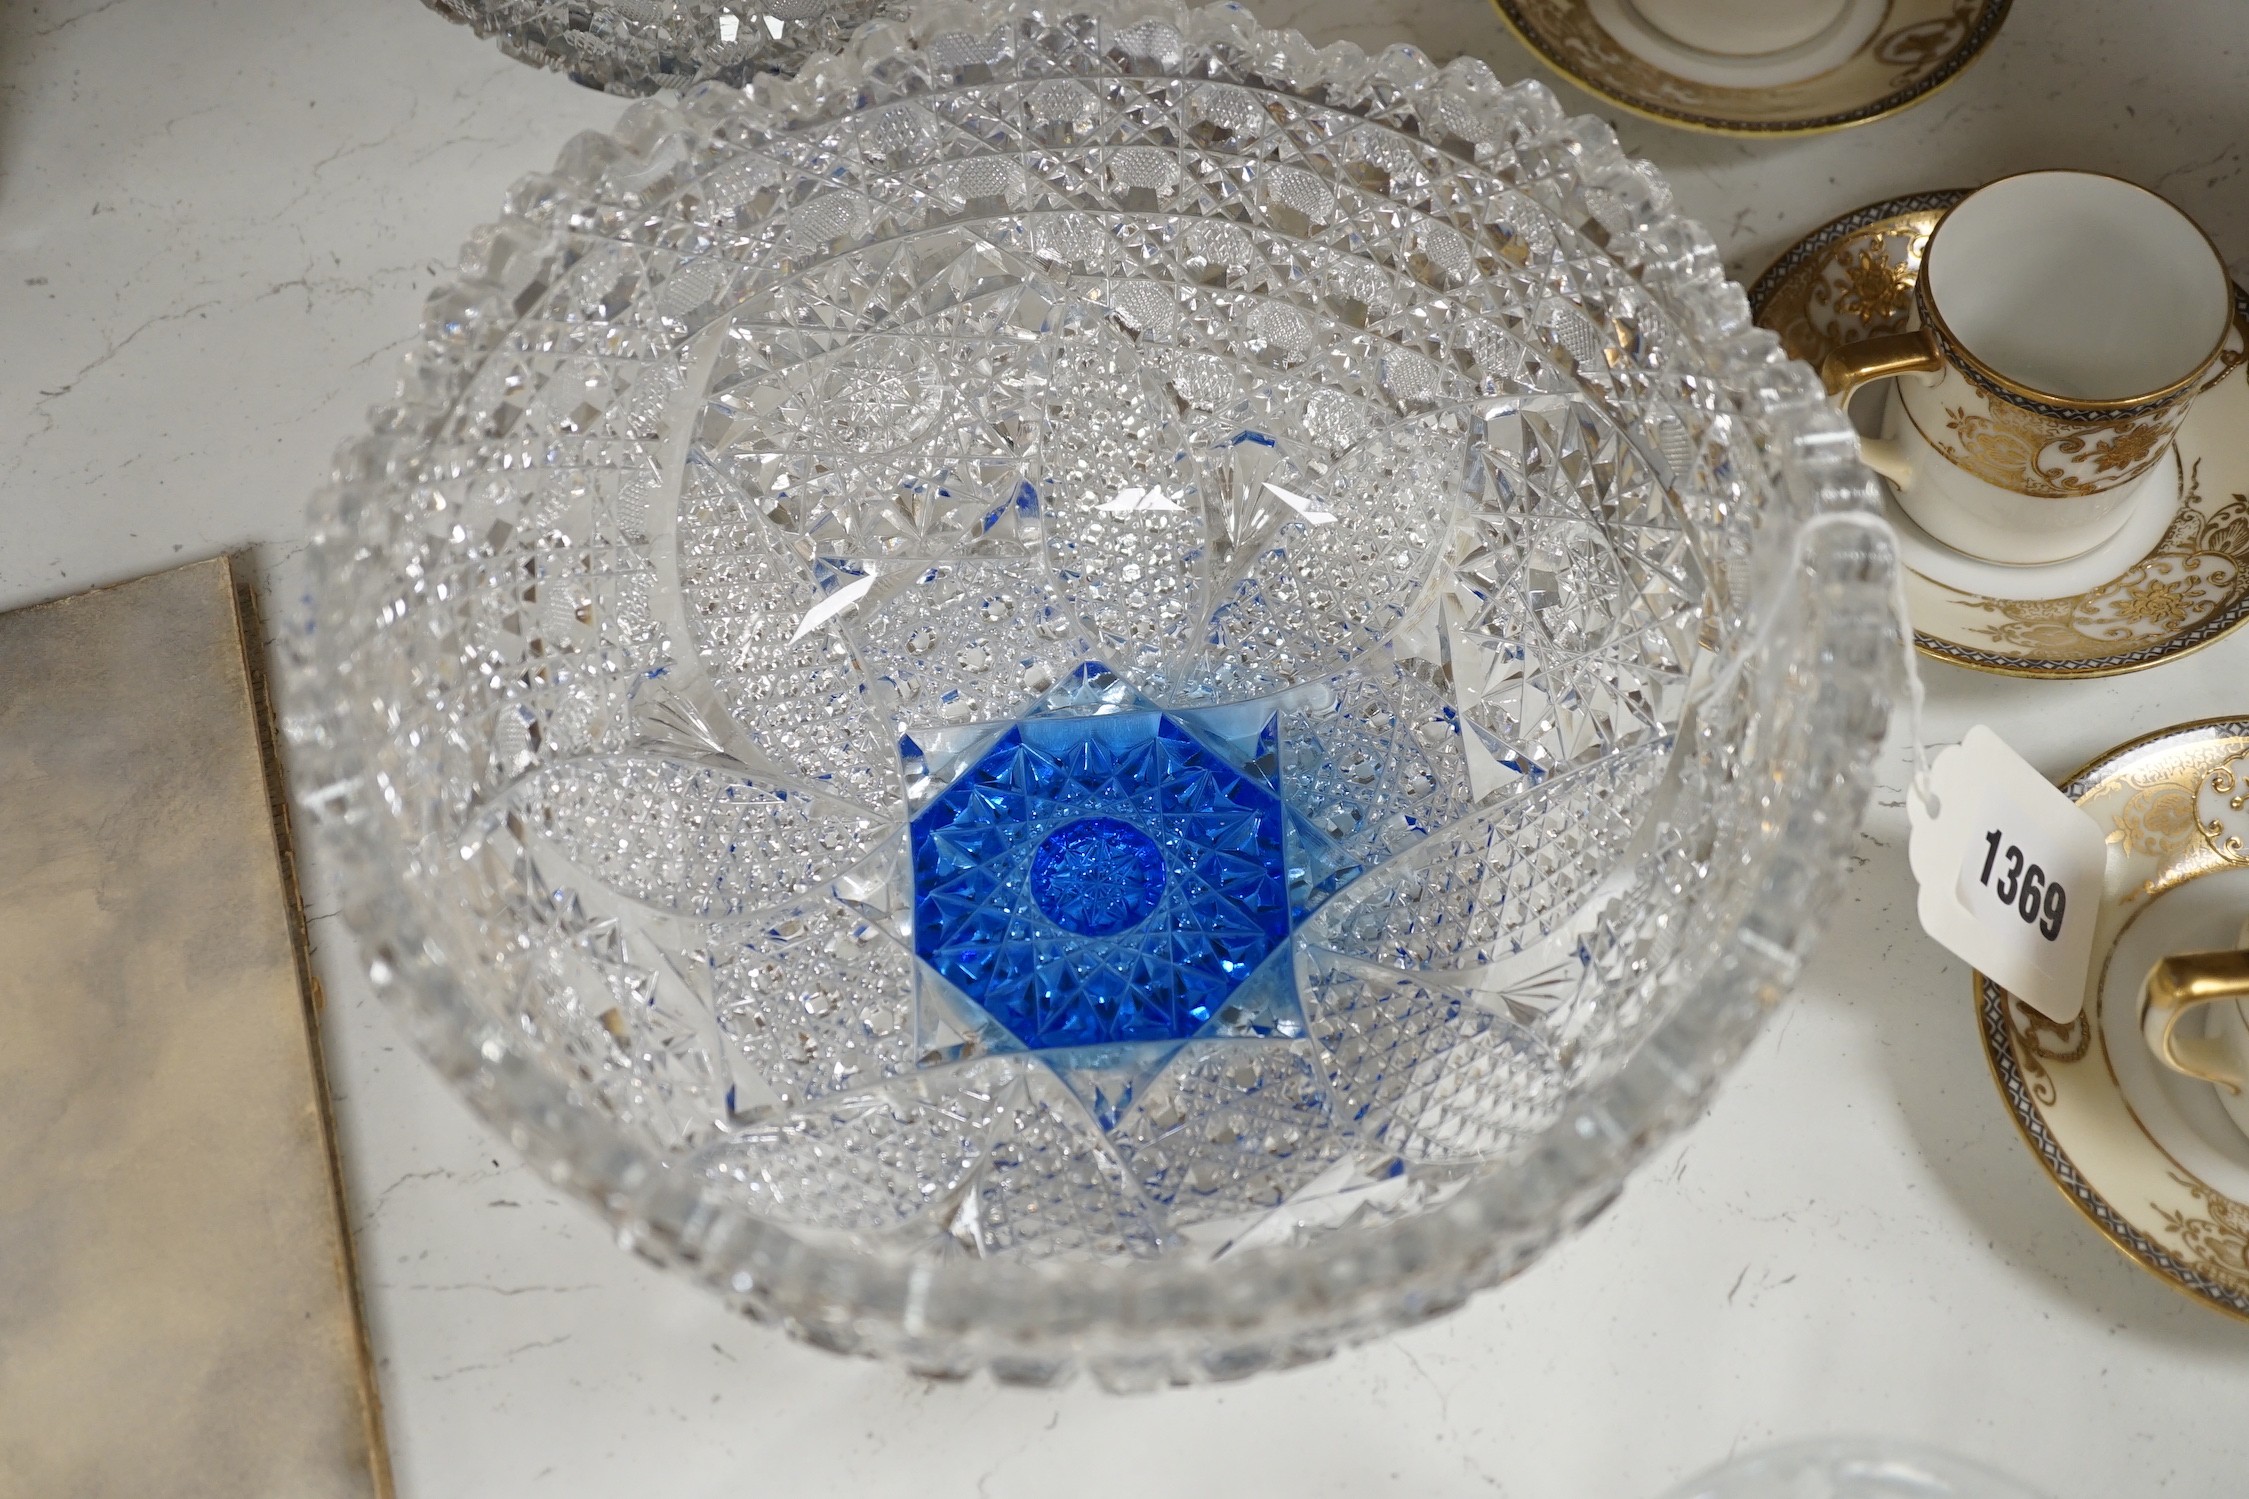 A Pair of Bohemian or Czech heavy cuts glass fruit bowls with blue flashed centres, 22.5 cm - Image 2 of 10